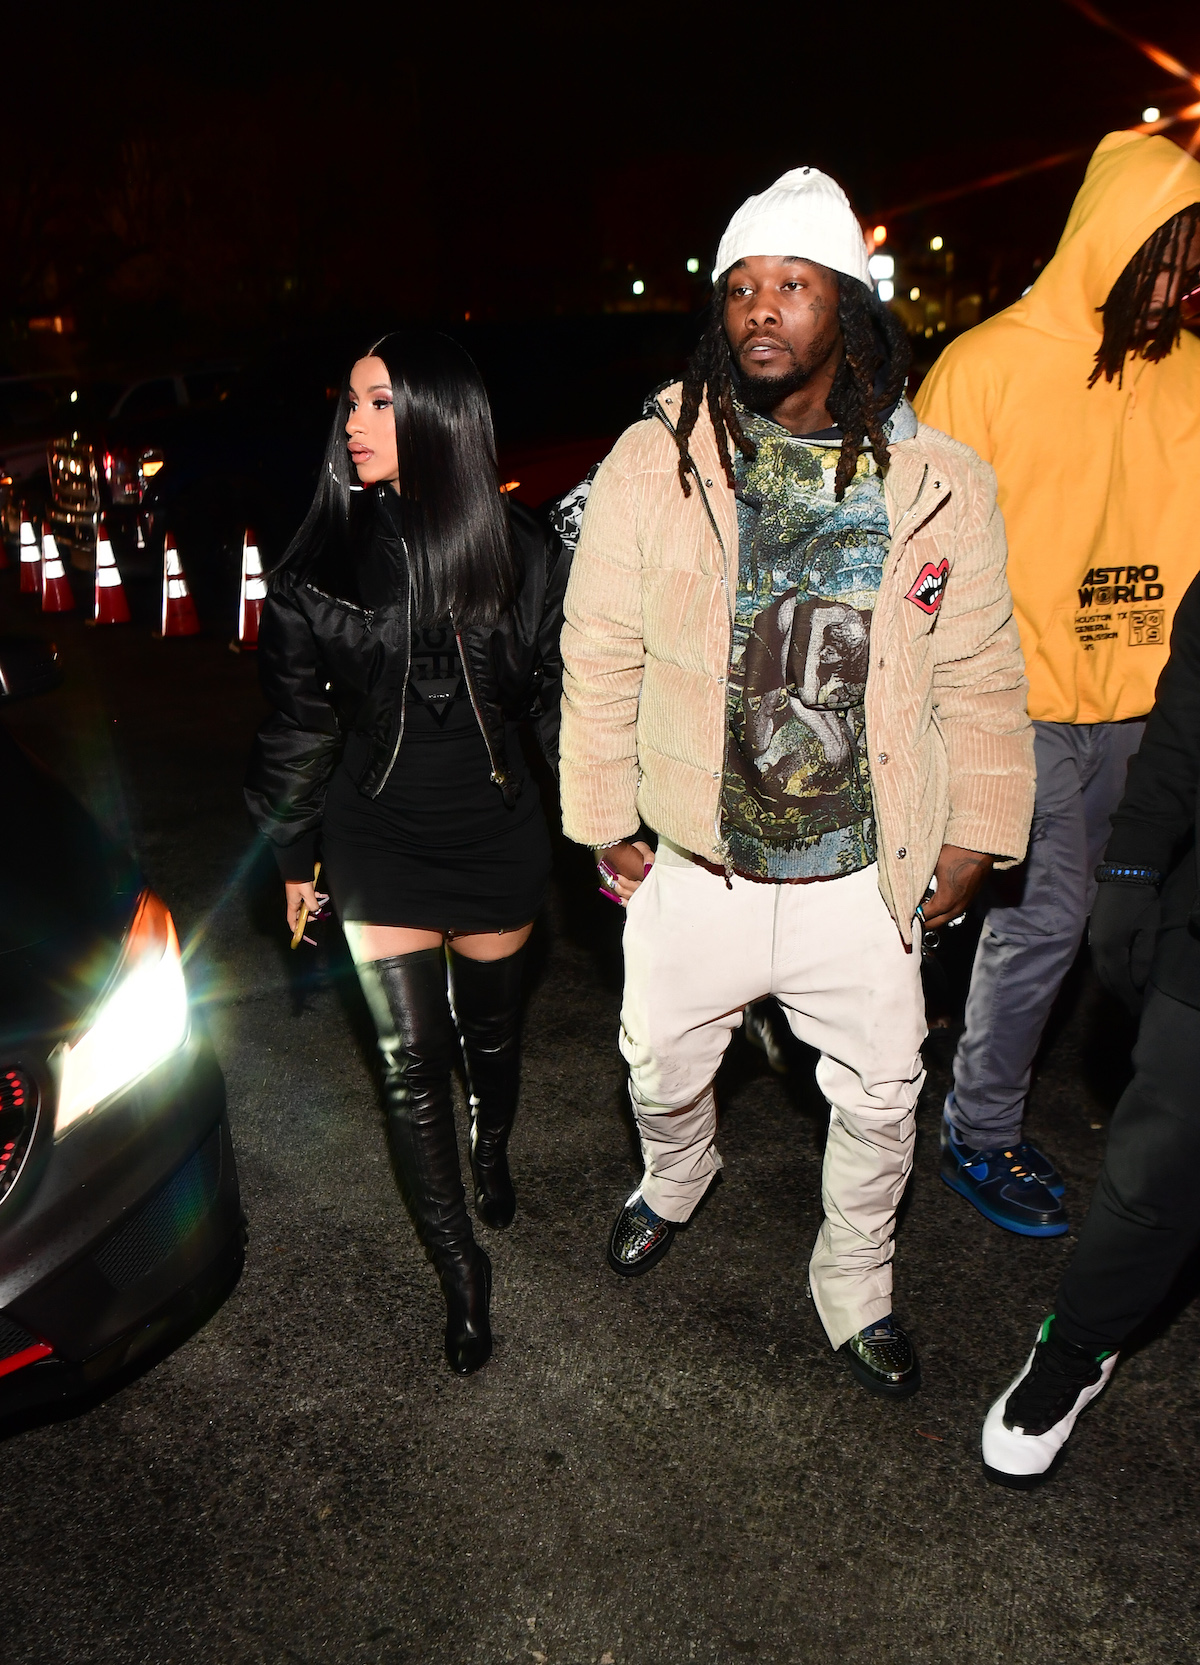 Cardi B and Offset's Latest Run-In With the Police Explained